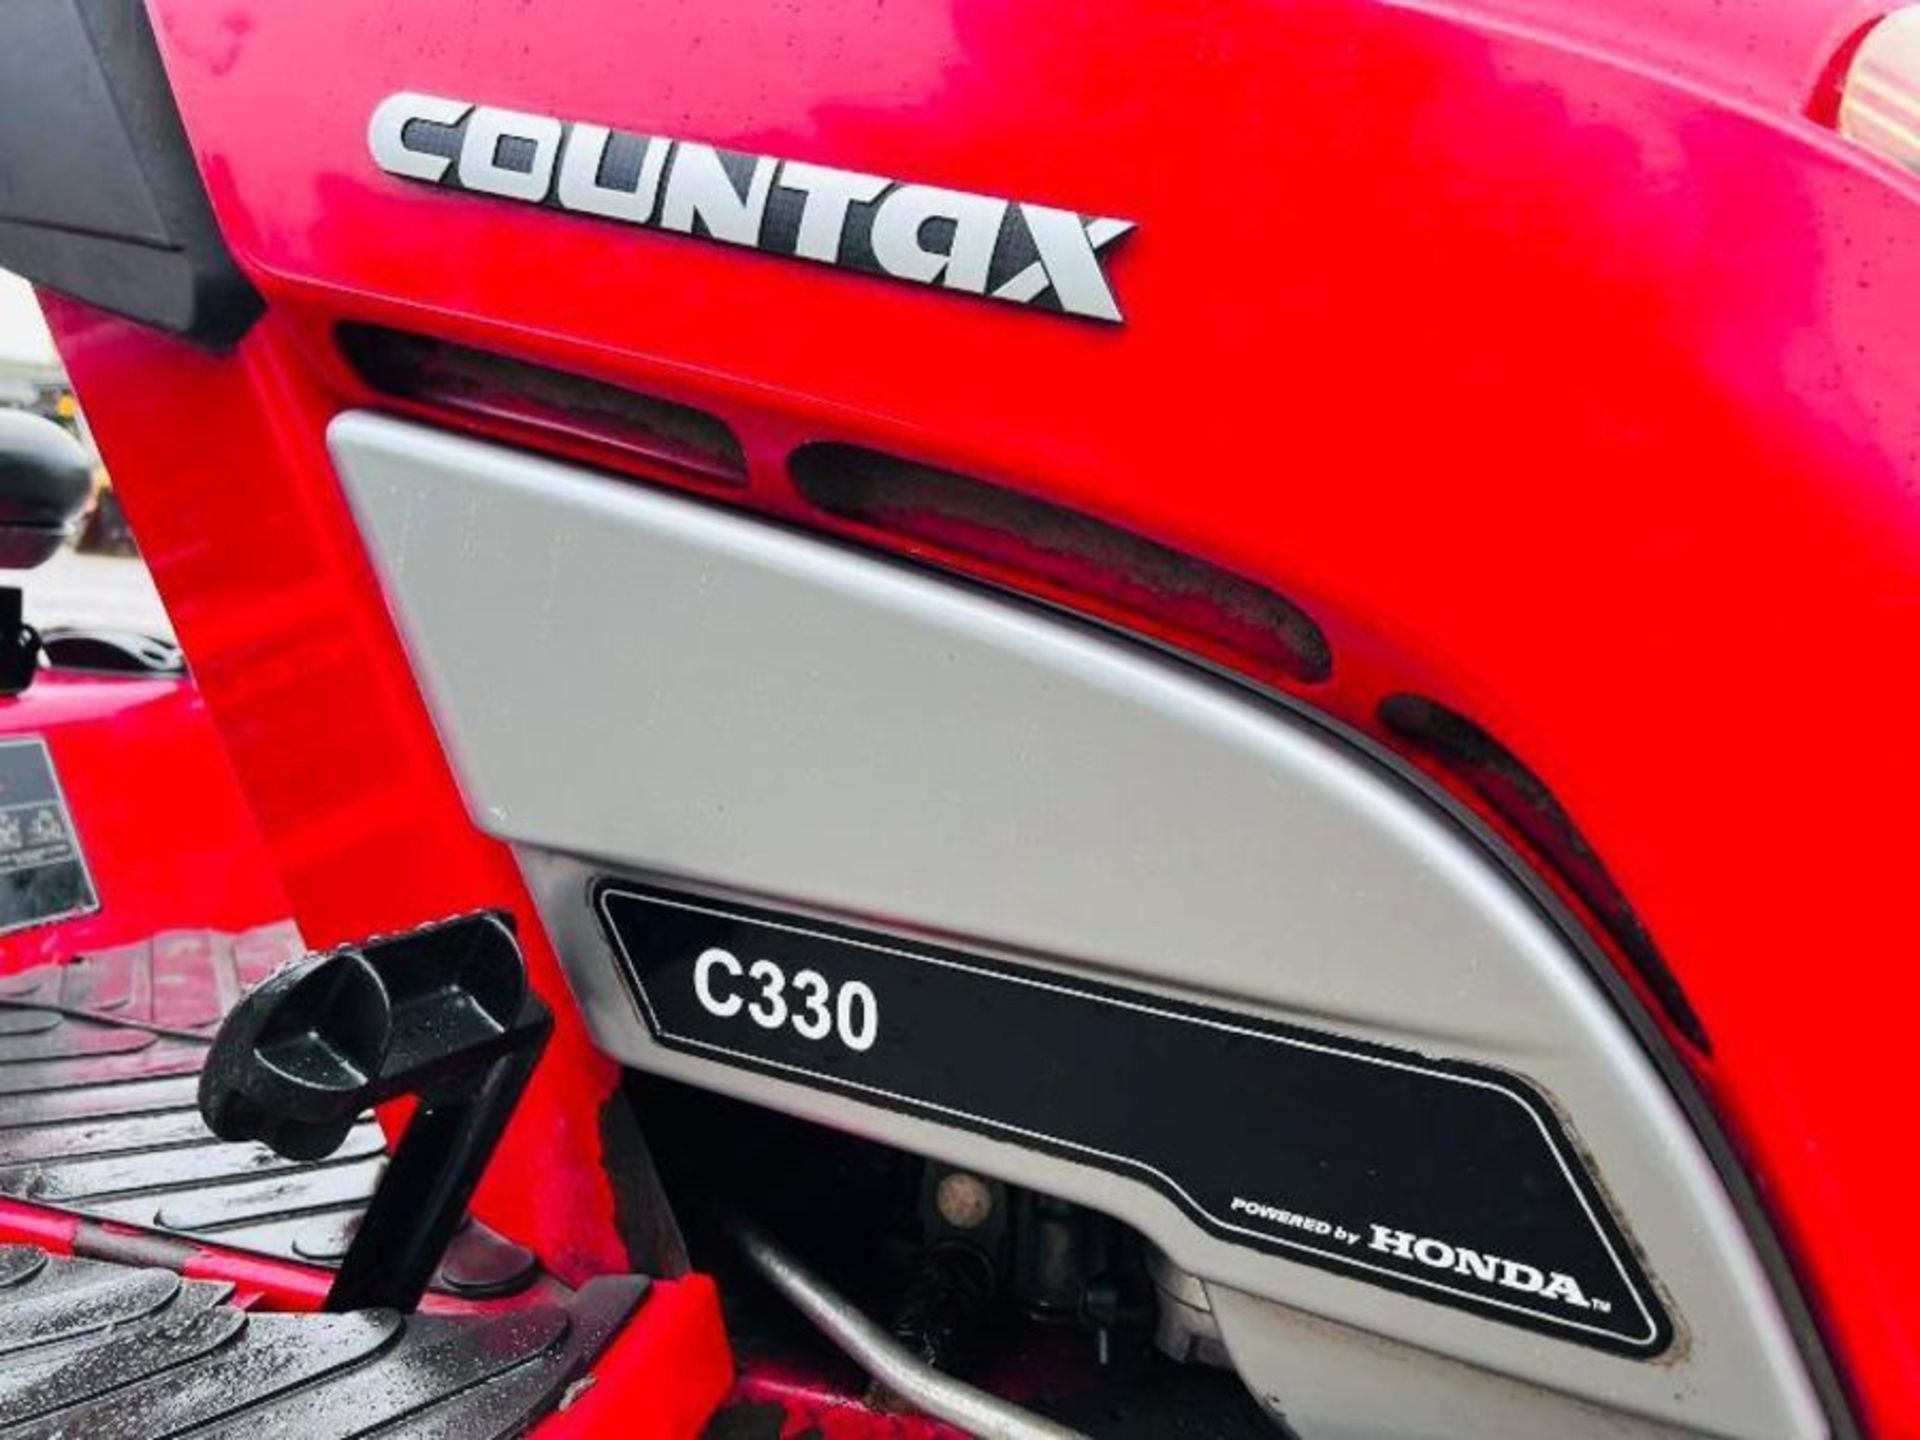 COUNTAX 330 RIDE ON MOWER *YEAR 2009* C/W COLLECTION BOX & HONDA ENGINE. - Image 5 of 12